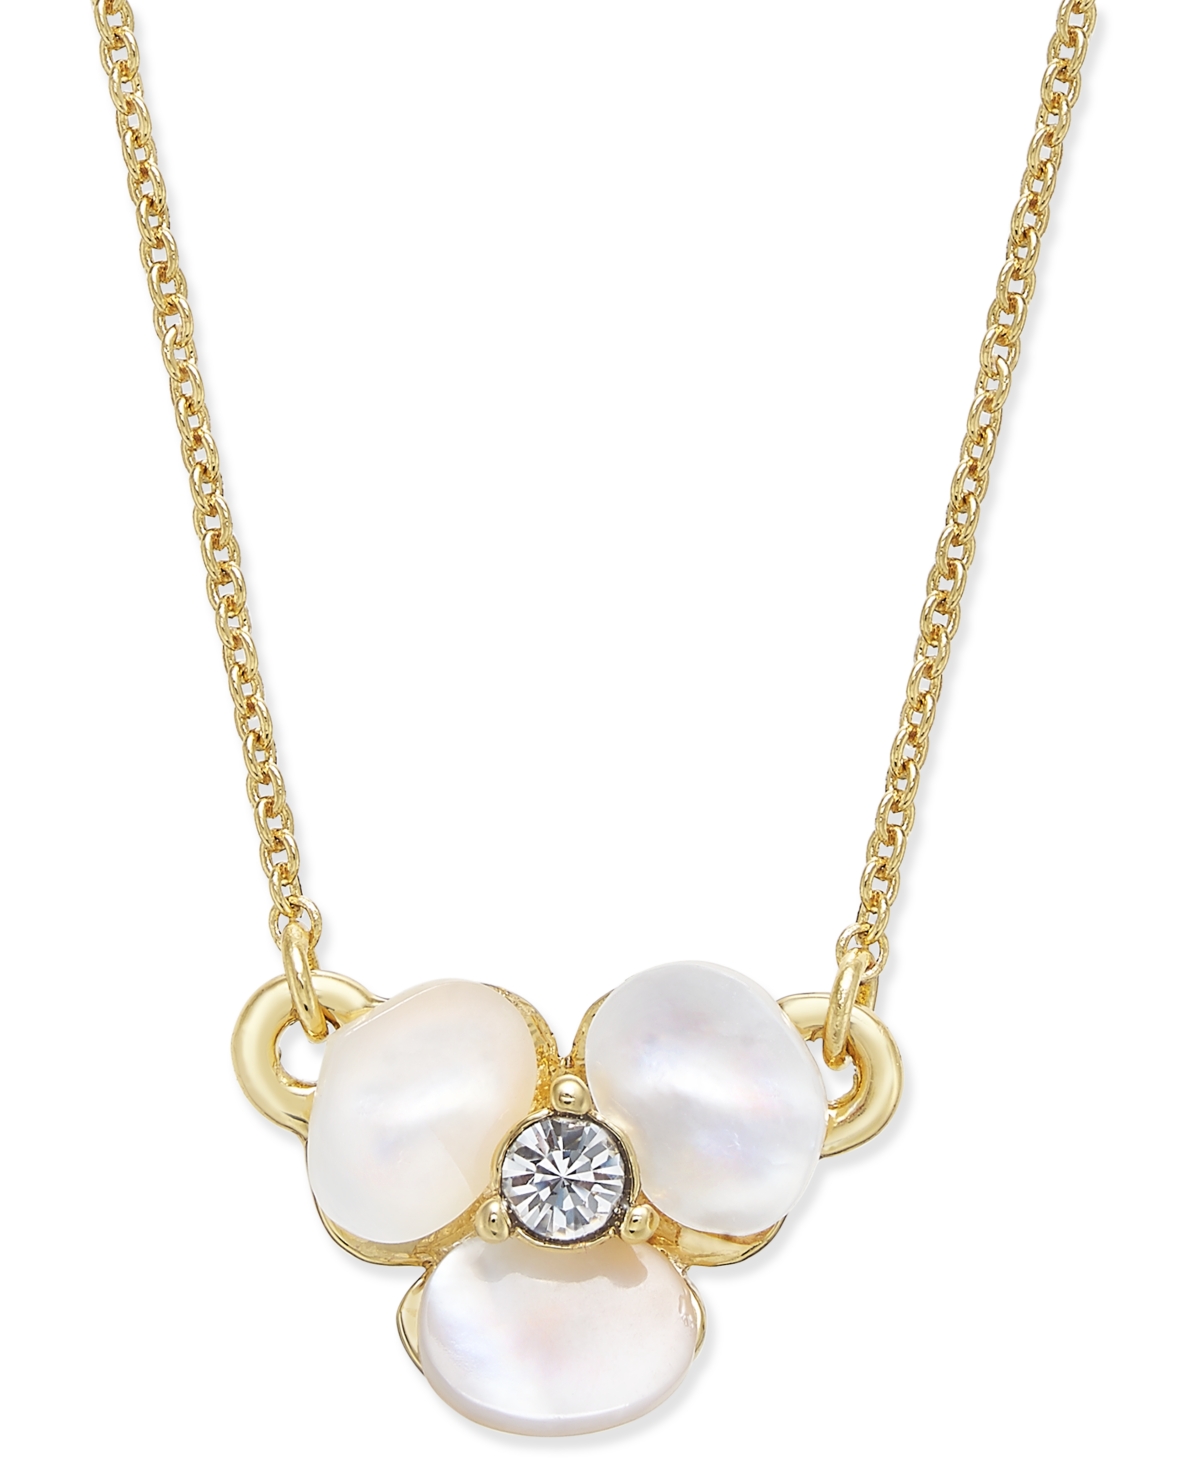 KATE SPADE GOLD-TONE PAVE & MOTHER-OF-PEARL FLOWER PENDANT NECKLACE